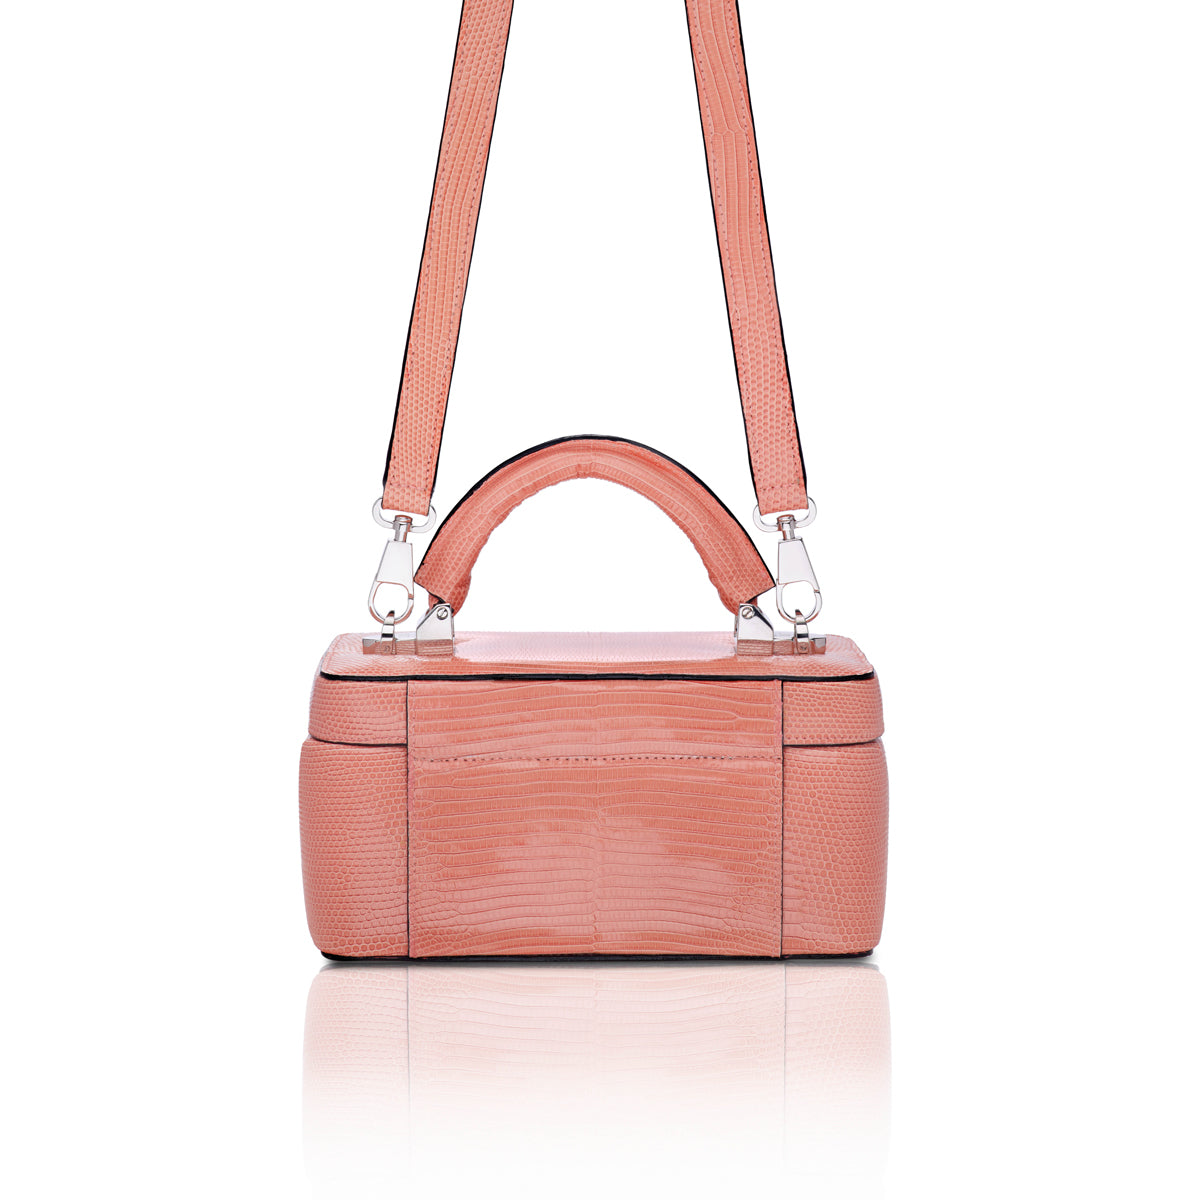 STALVEY Beauty Case in Coral Lizard Front View